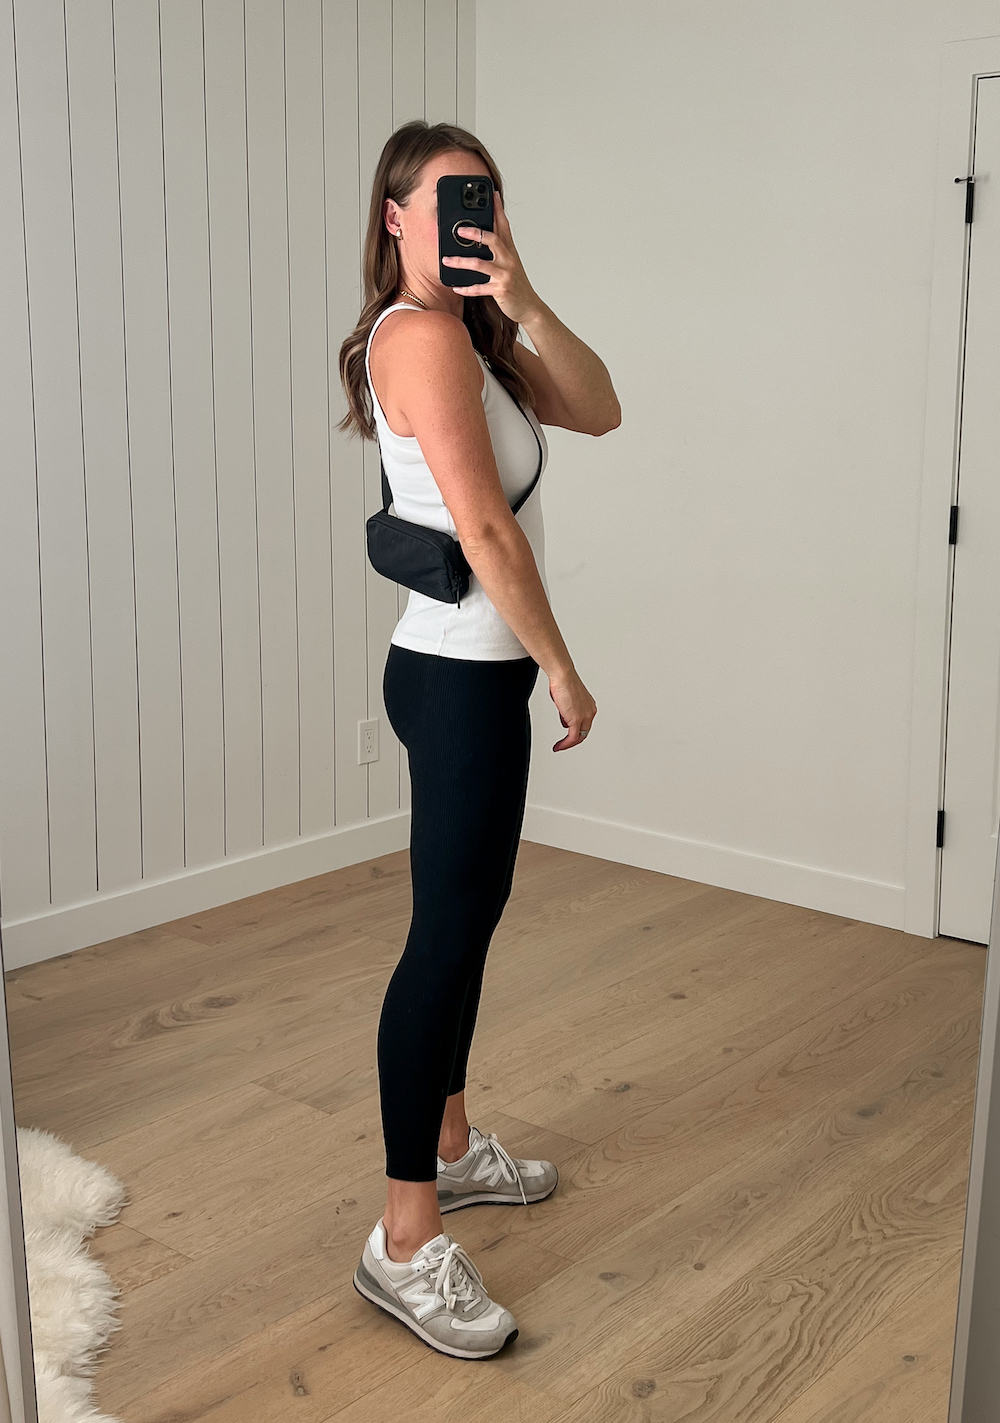 Christal wearing a white tank top, black leggings, white sneakers, and a black Lululemon belt bag crossbody style with the belt bag behind the back